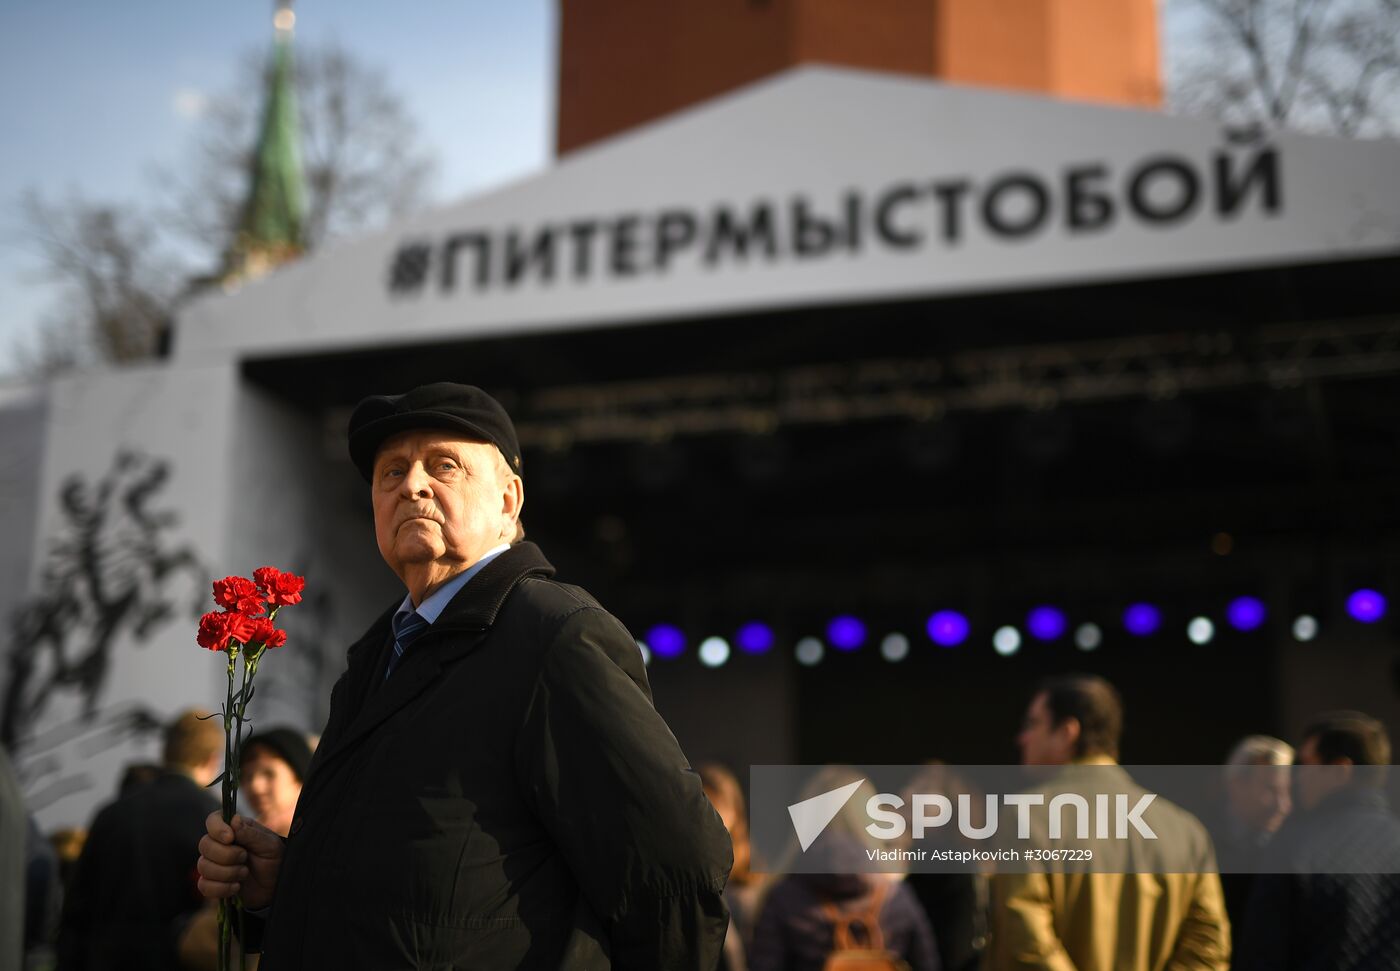 Commemoration and solidarity campaign "Saint Petersburg, we are with you"